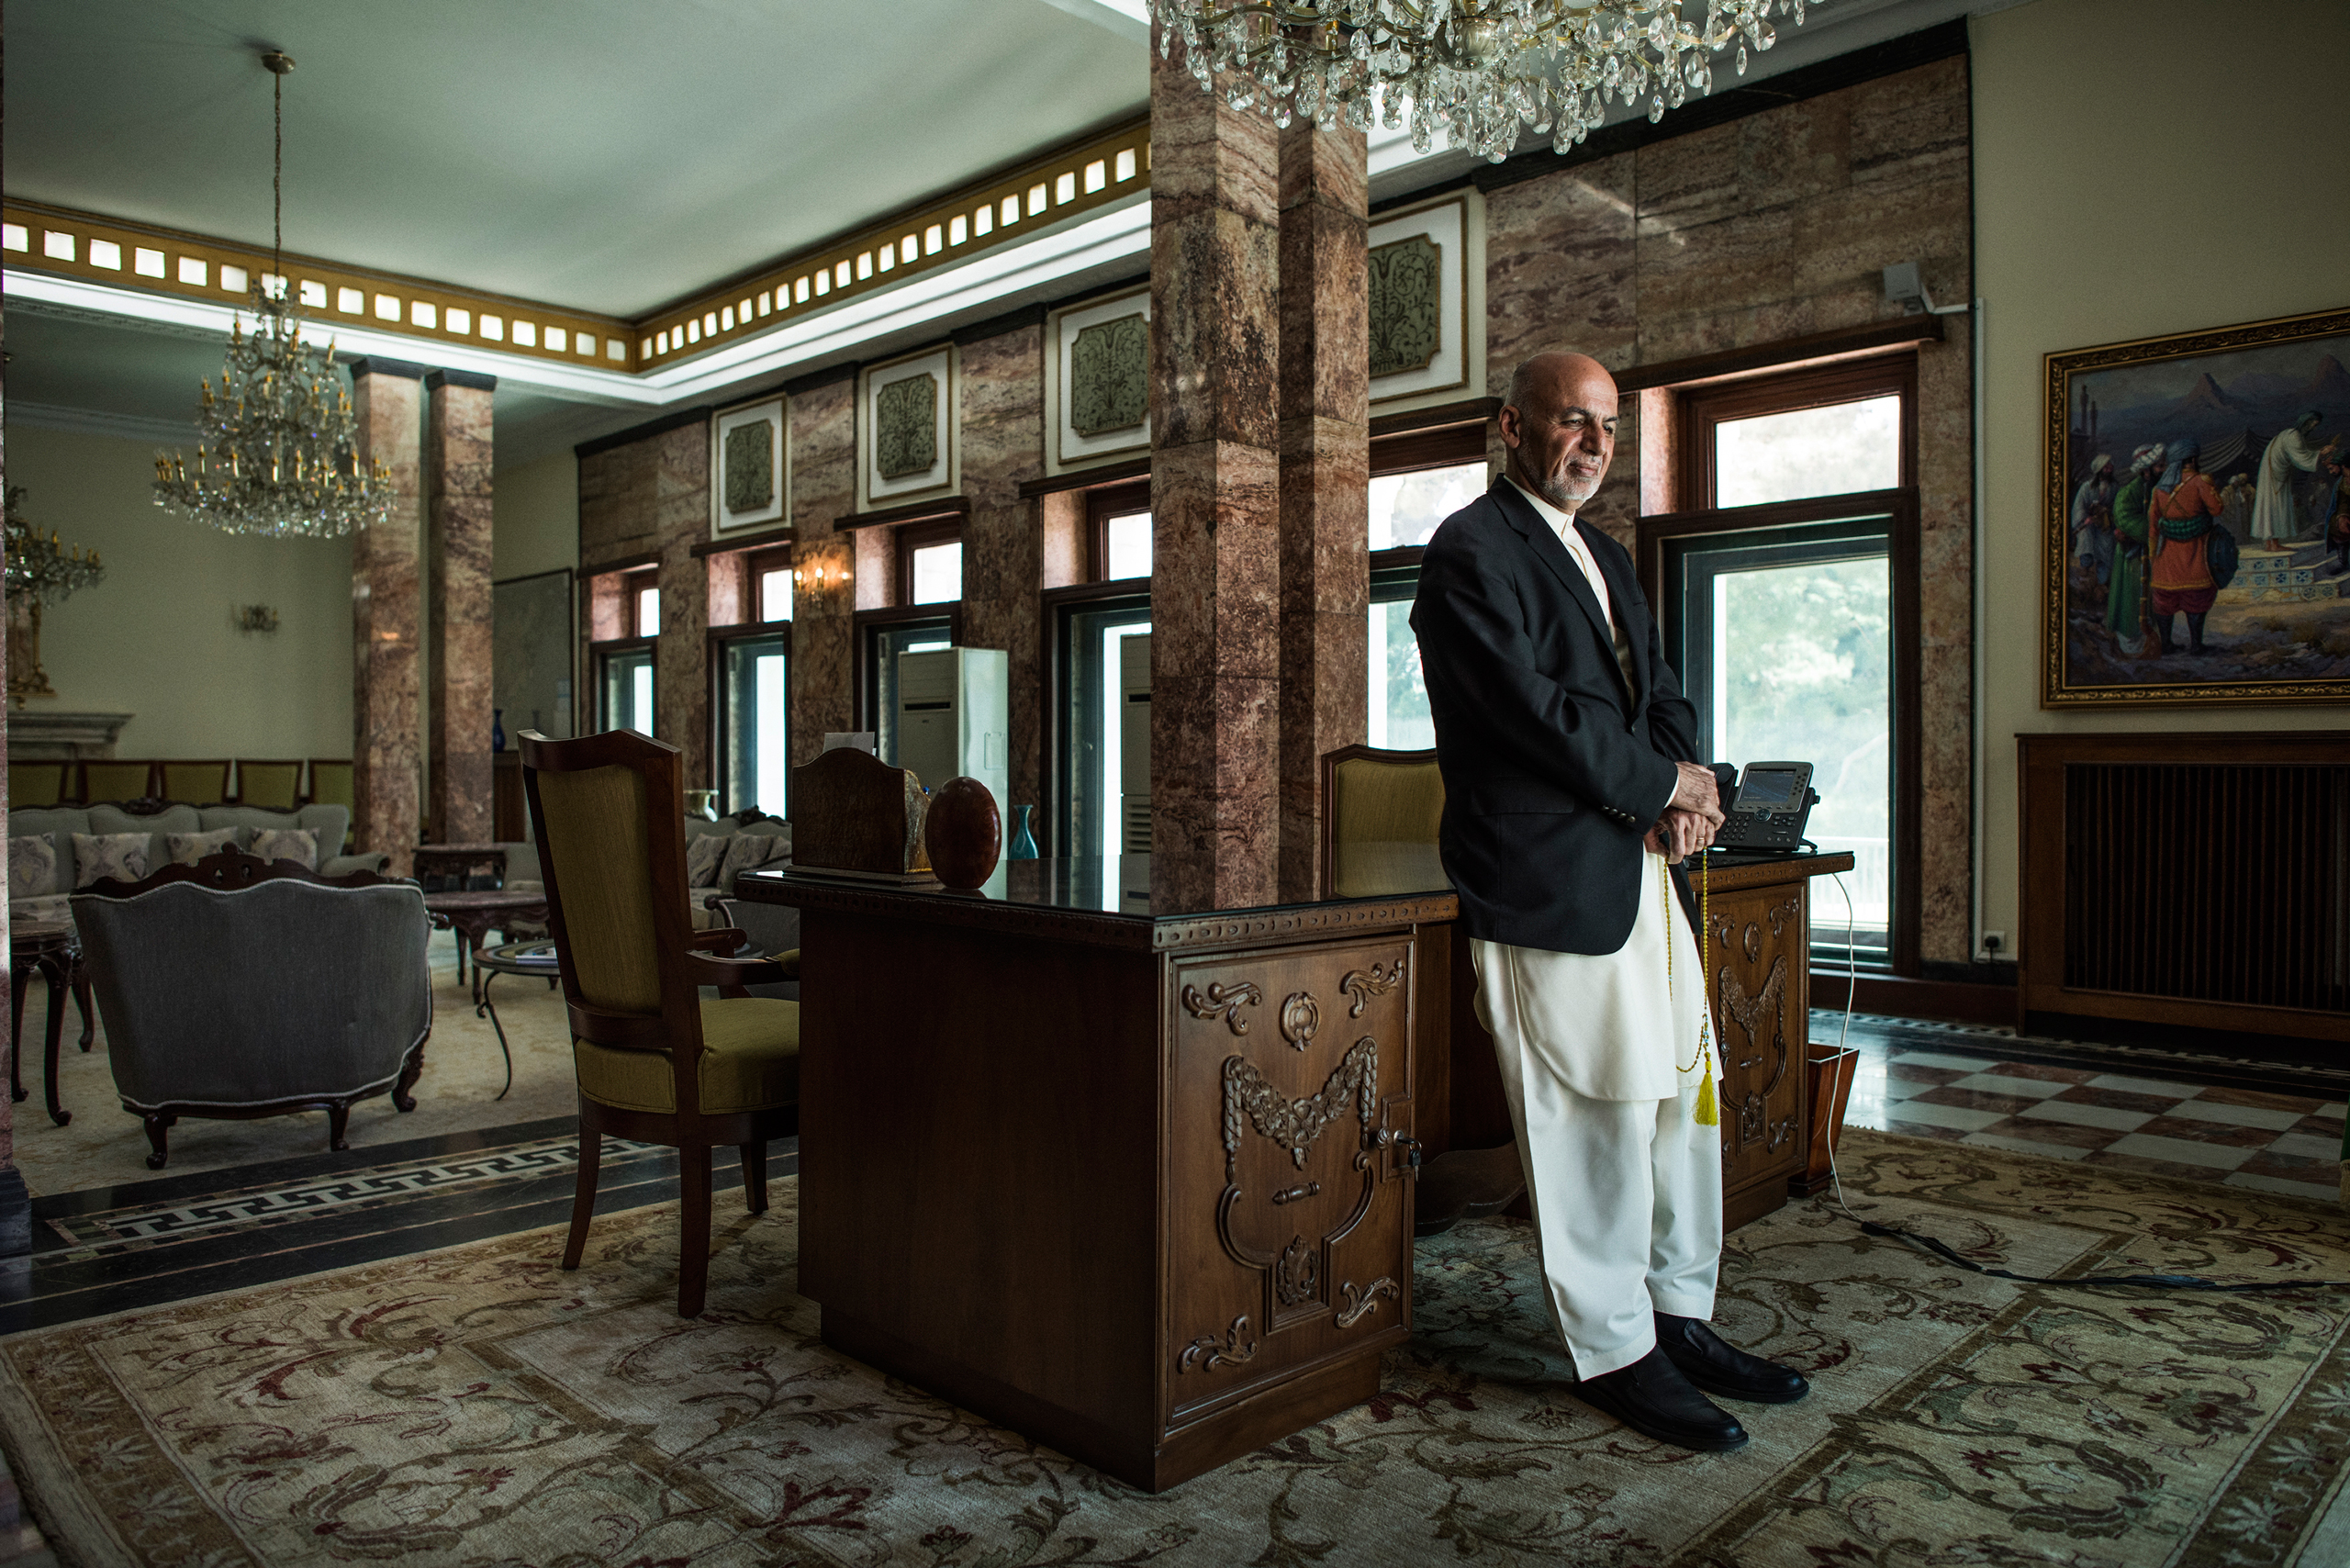 Afghan President Ashraf Ghani stands at his desk in the presidential palace in Kabul on May 11, 2017. (Andrew Quilty for TIME)